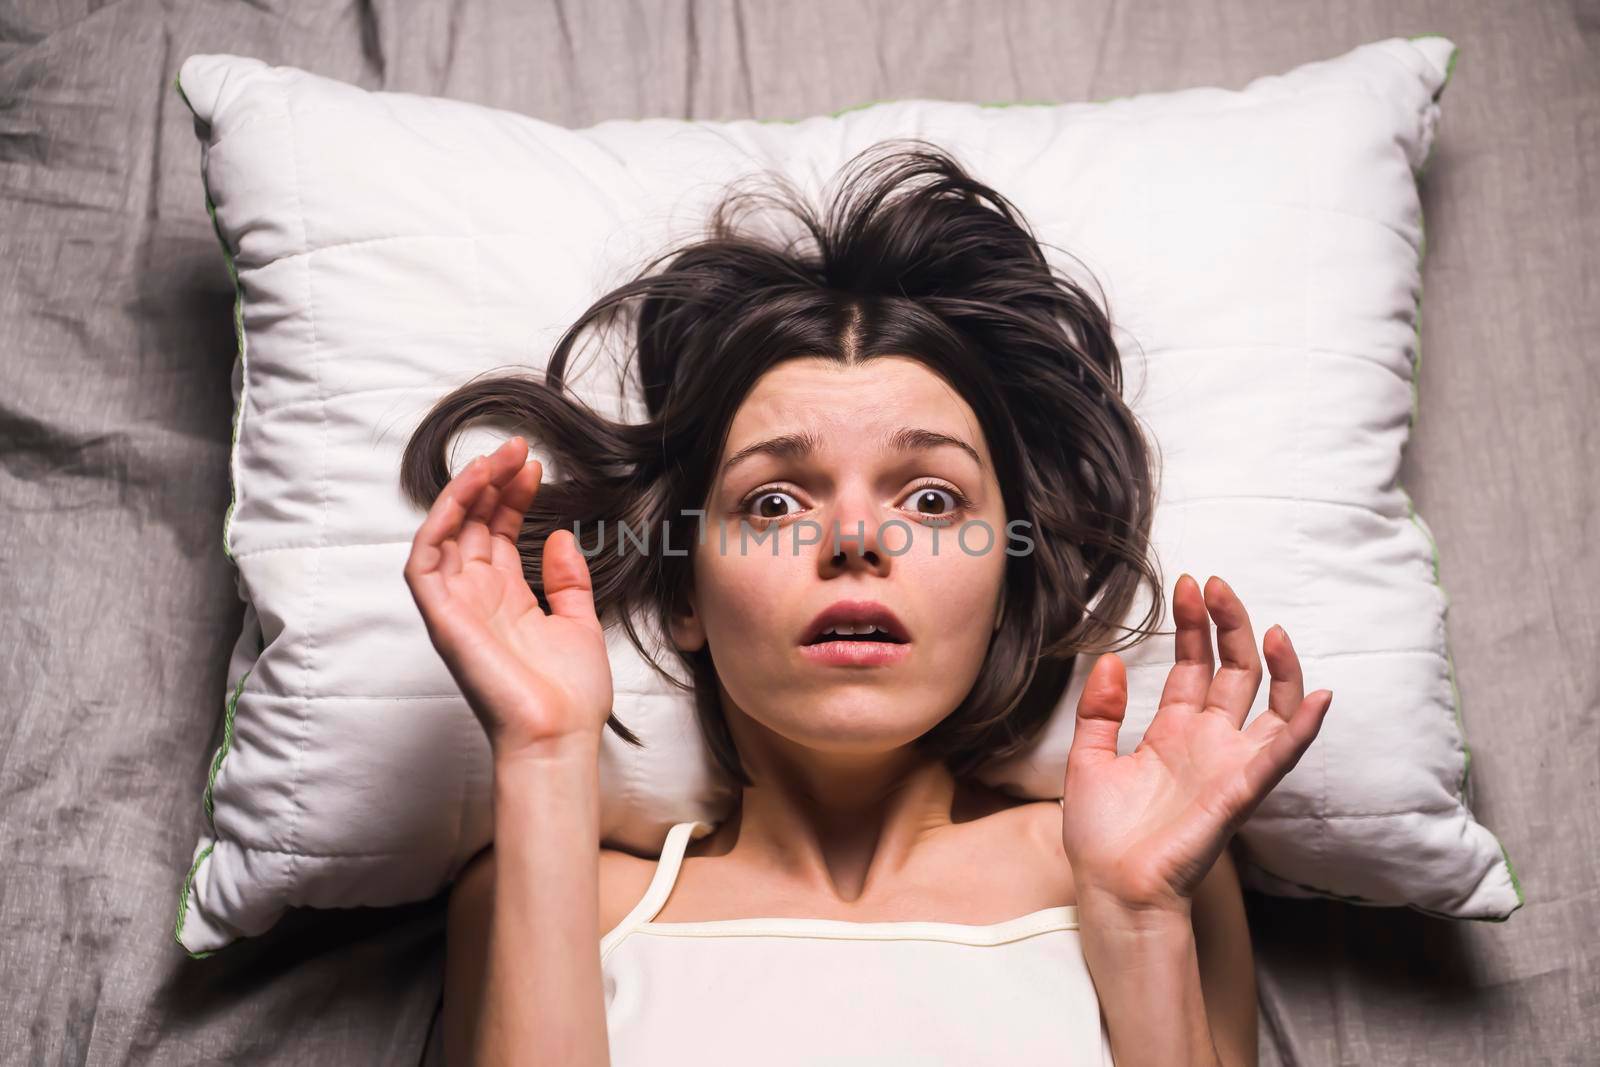 Young girl with a frightened expression wakes up from a nightmare in bed. Woman had a terrible unpleasant dream, she is experiencing a panic attack. Life stress, mental health problems and insomnia.